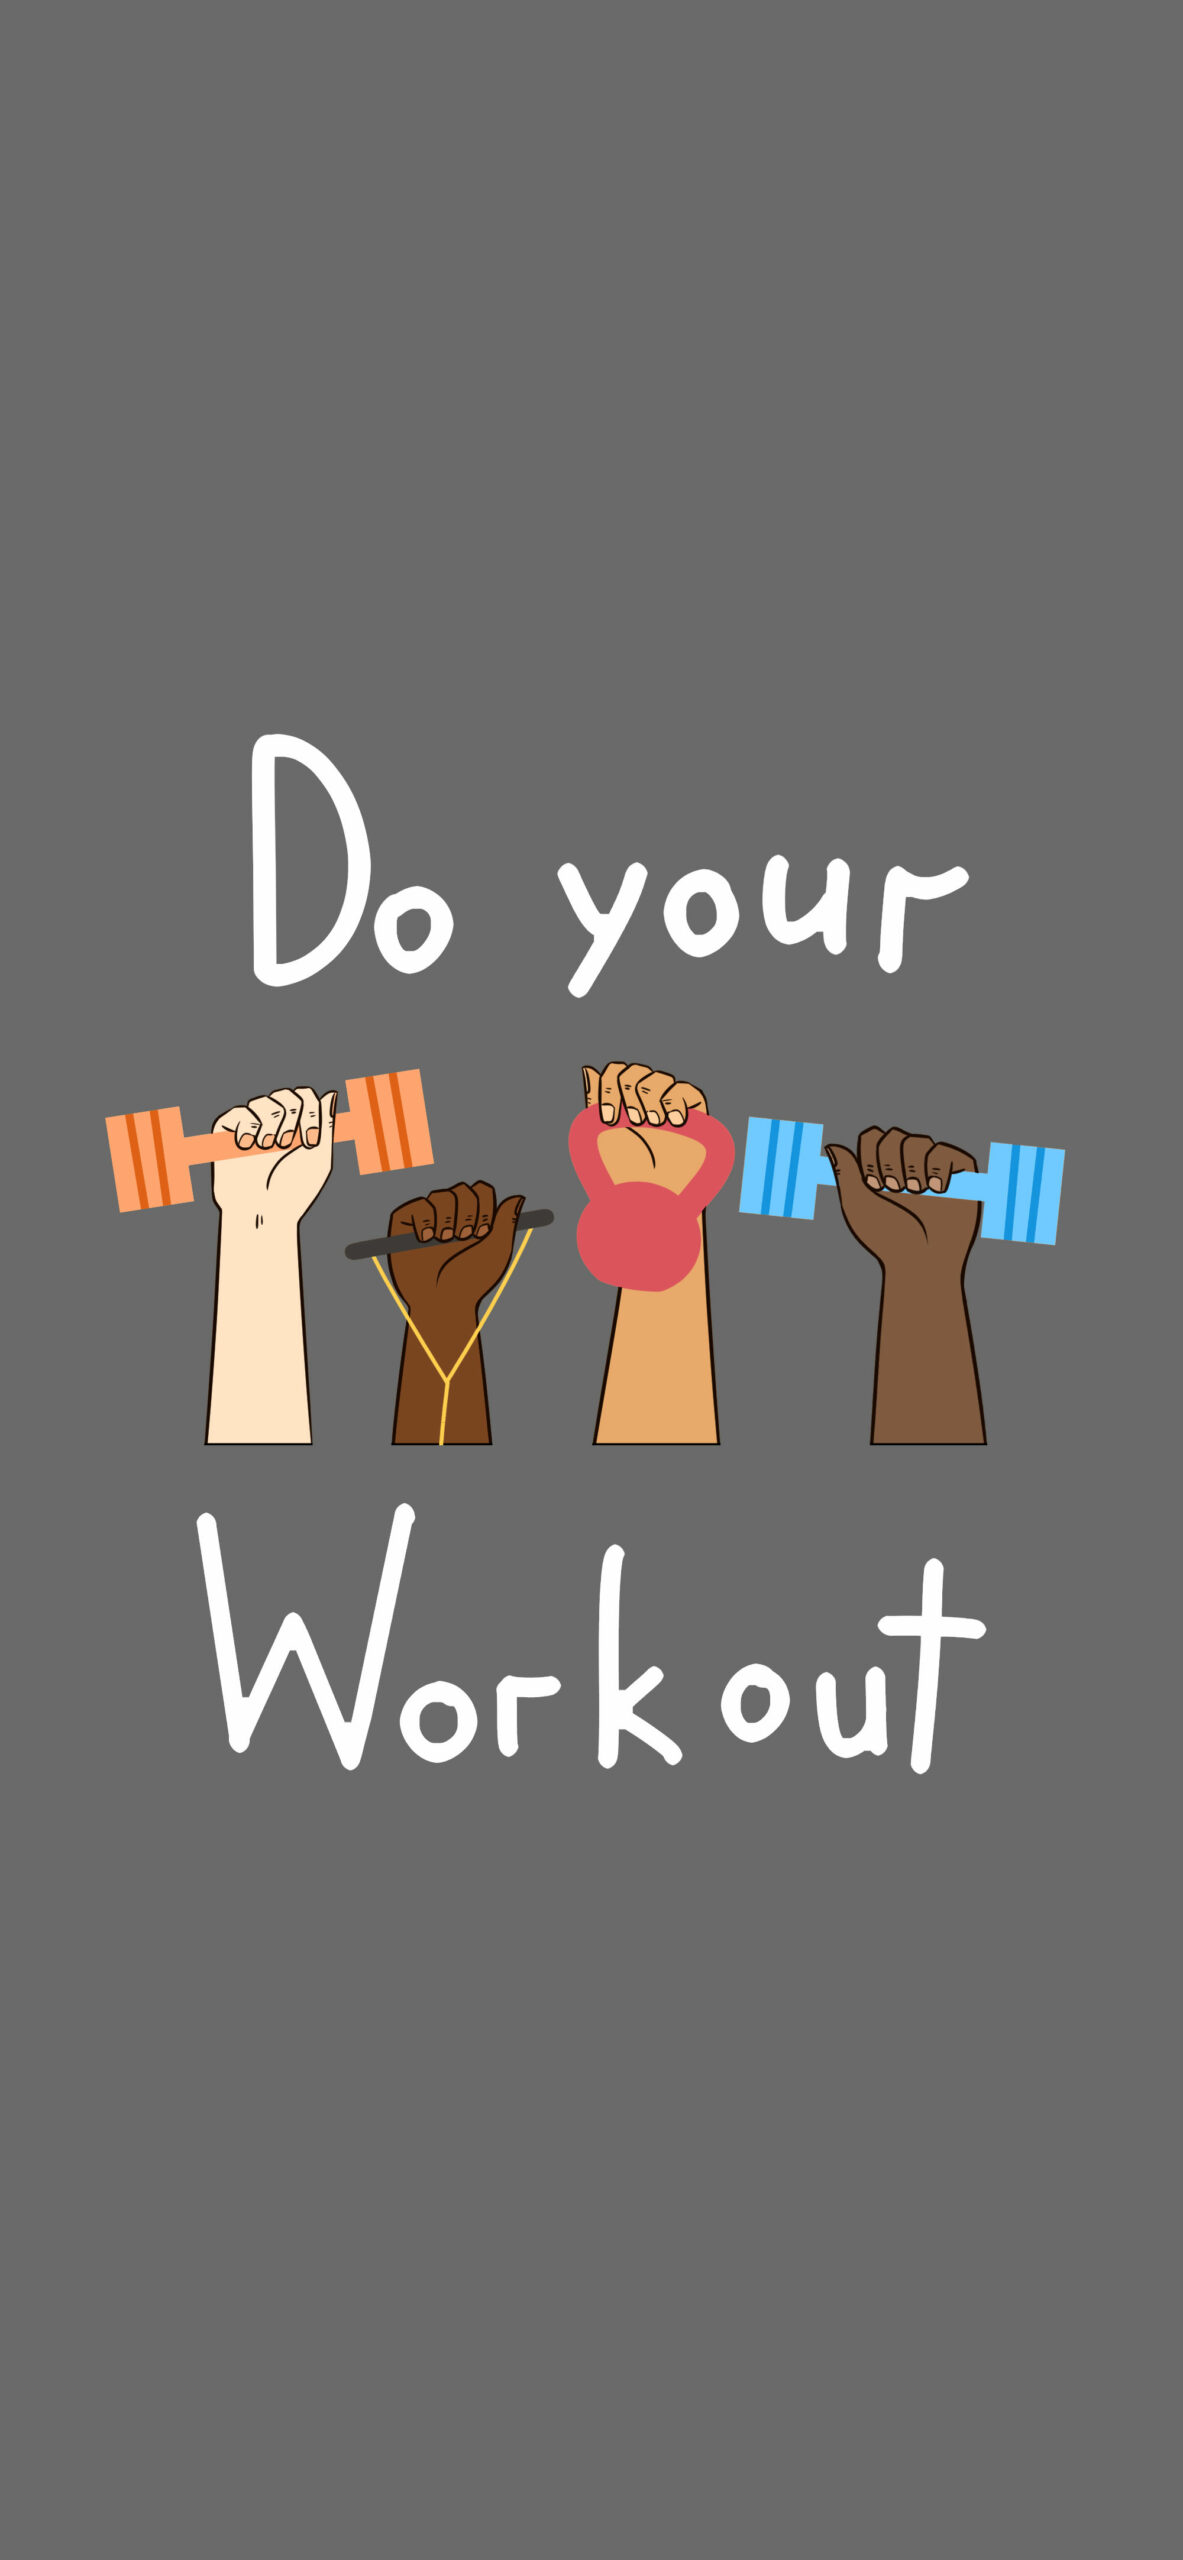 do your workout wallpaper 2